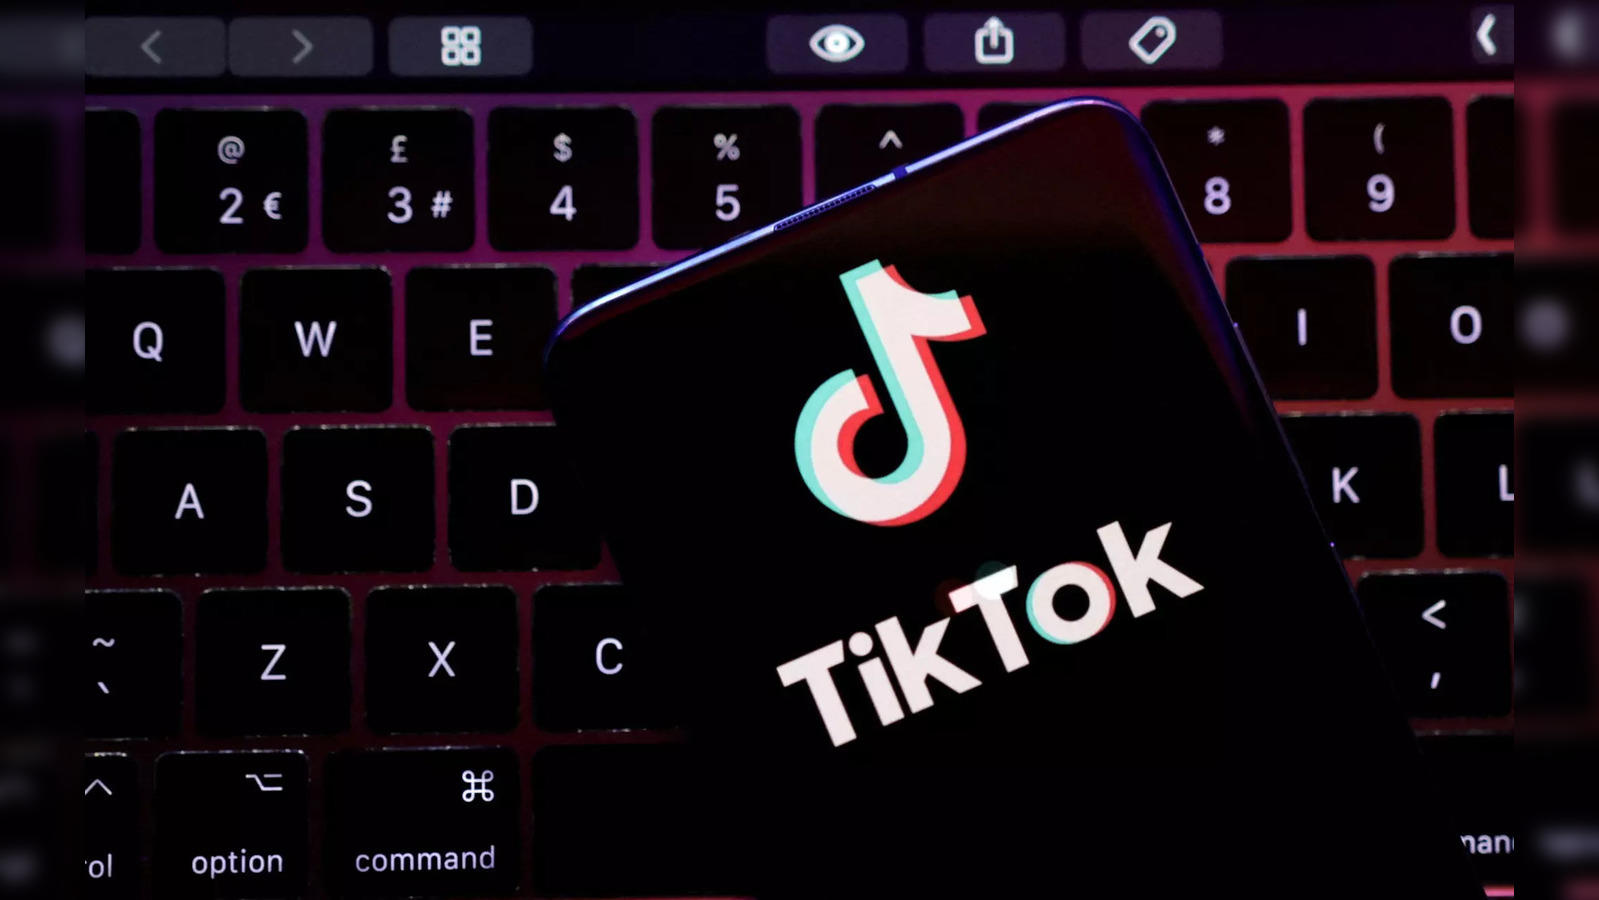 A bill that could lead to a TikTok ban is gaining momentum in